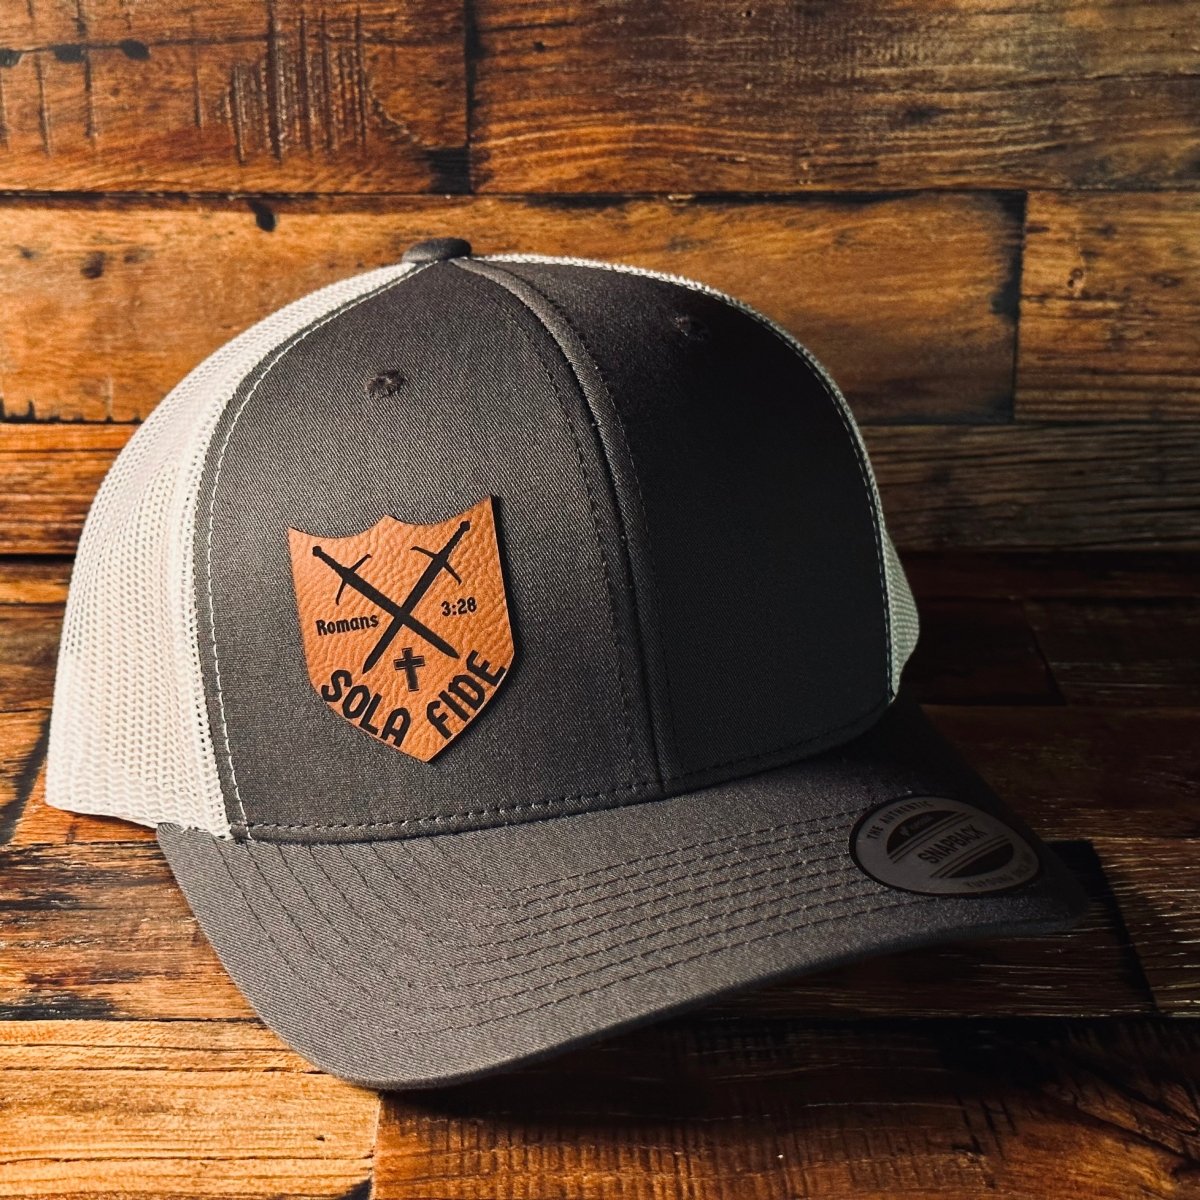 Hat - Sola Fide - Patch Hat - The Reformed Sage - #reformed# - #reformed_gifts# - #christian_gifts#